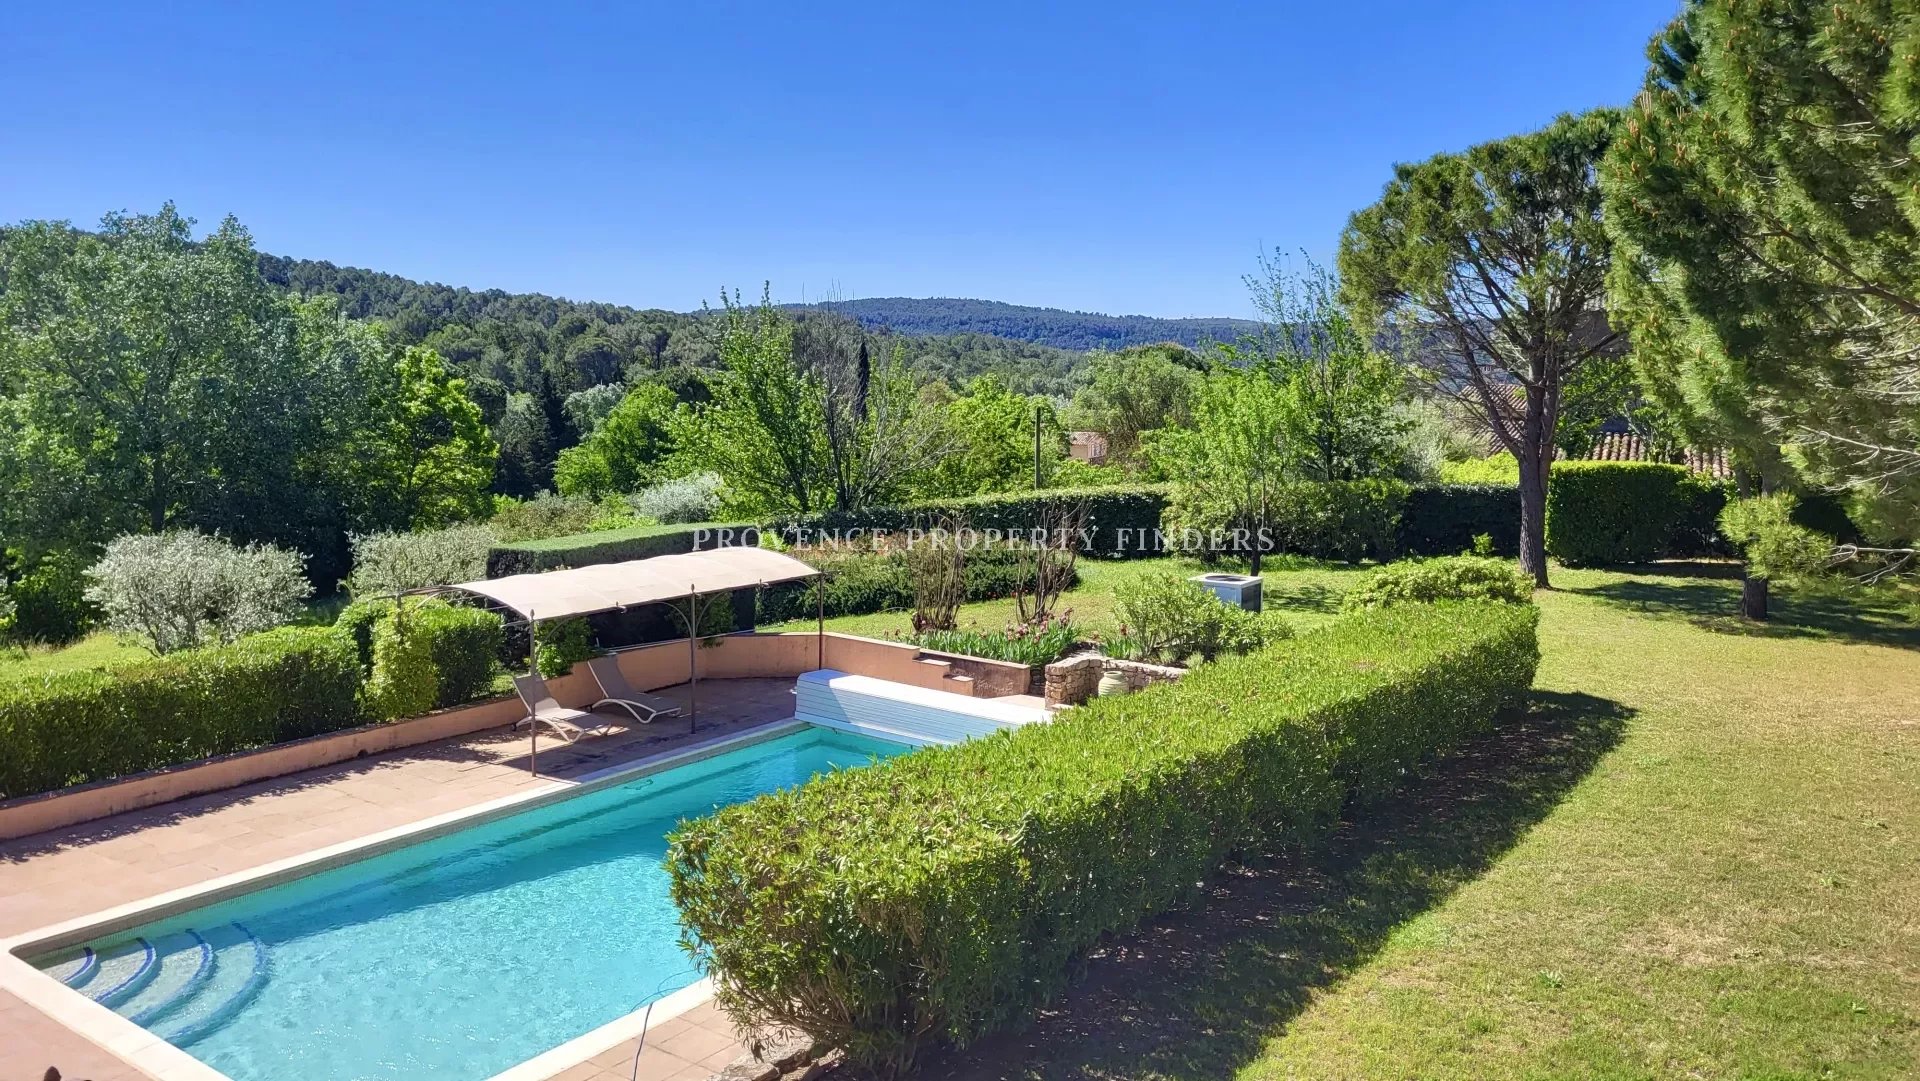 Exclusivity, Villa, 4 bedrooms, heated pool, 5 minute walk from the village.